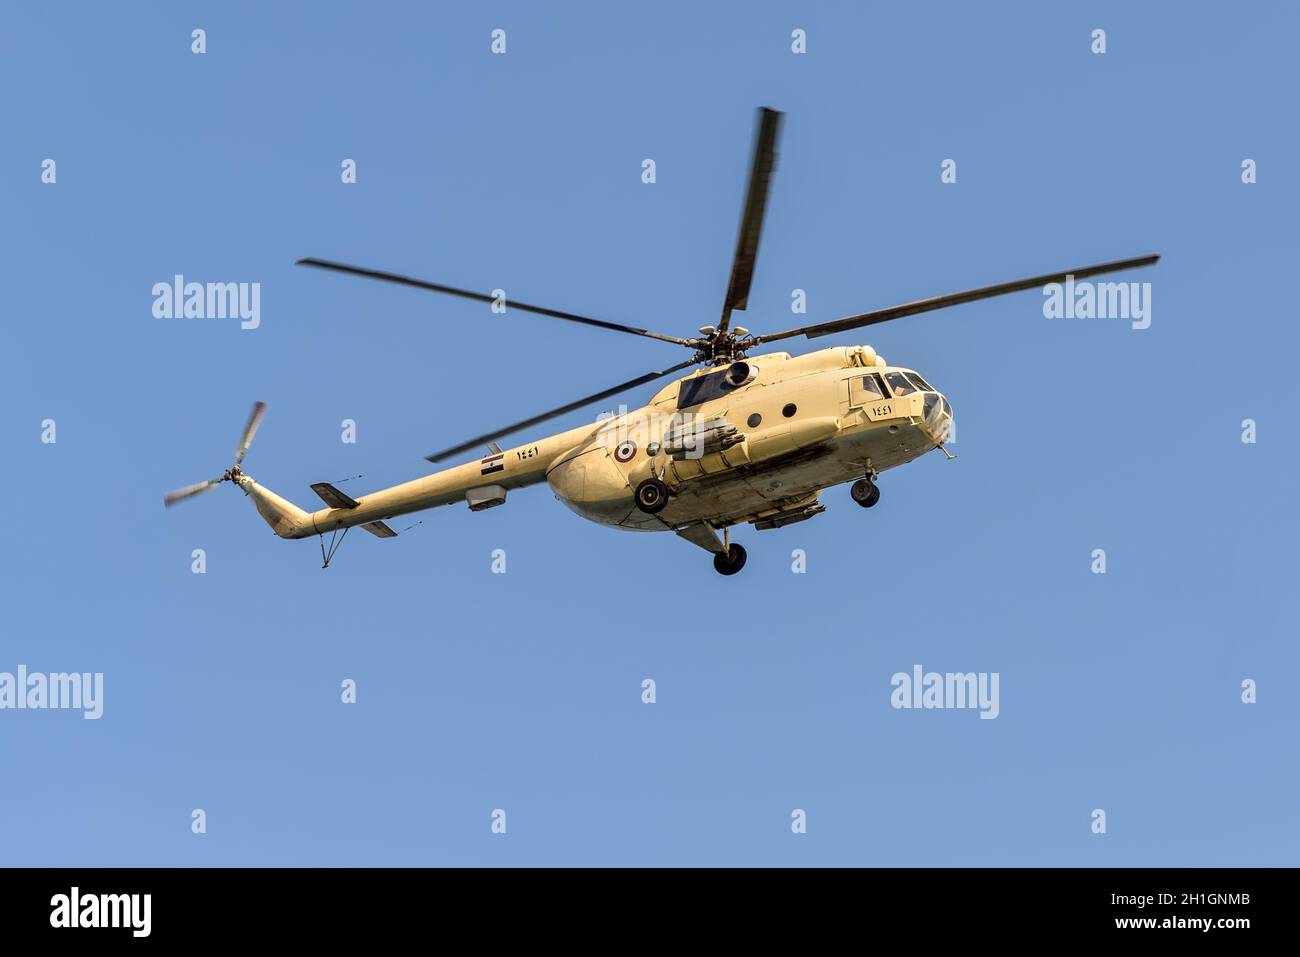 Ismailia, Egypt - November 14, 2019: A Mil Mi-8 Hip helicopter patrolling the Suez Canal in Egypt. Stock Photo